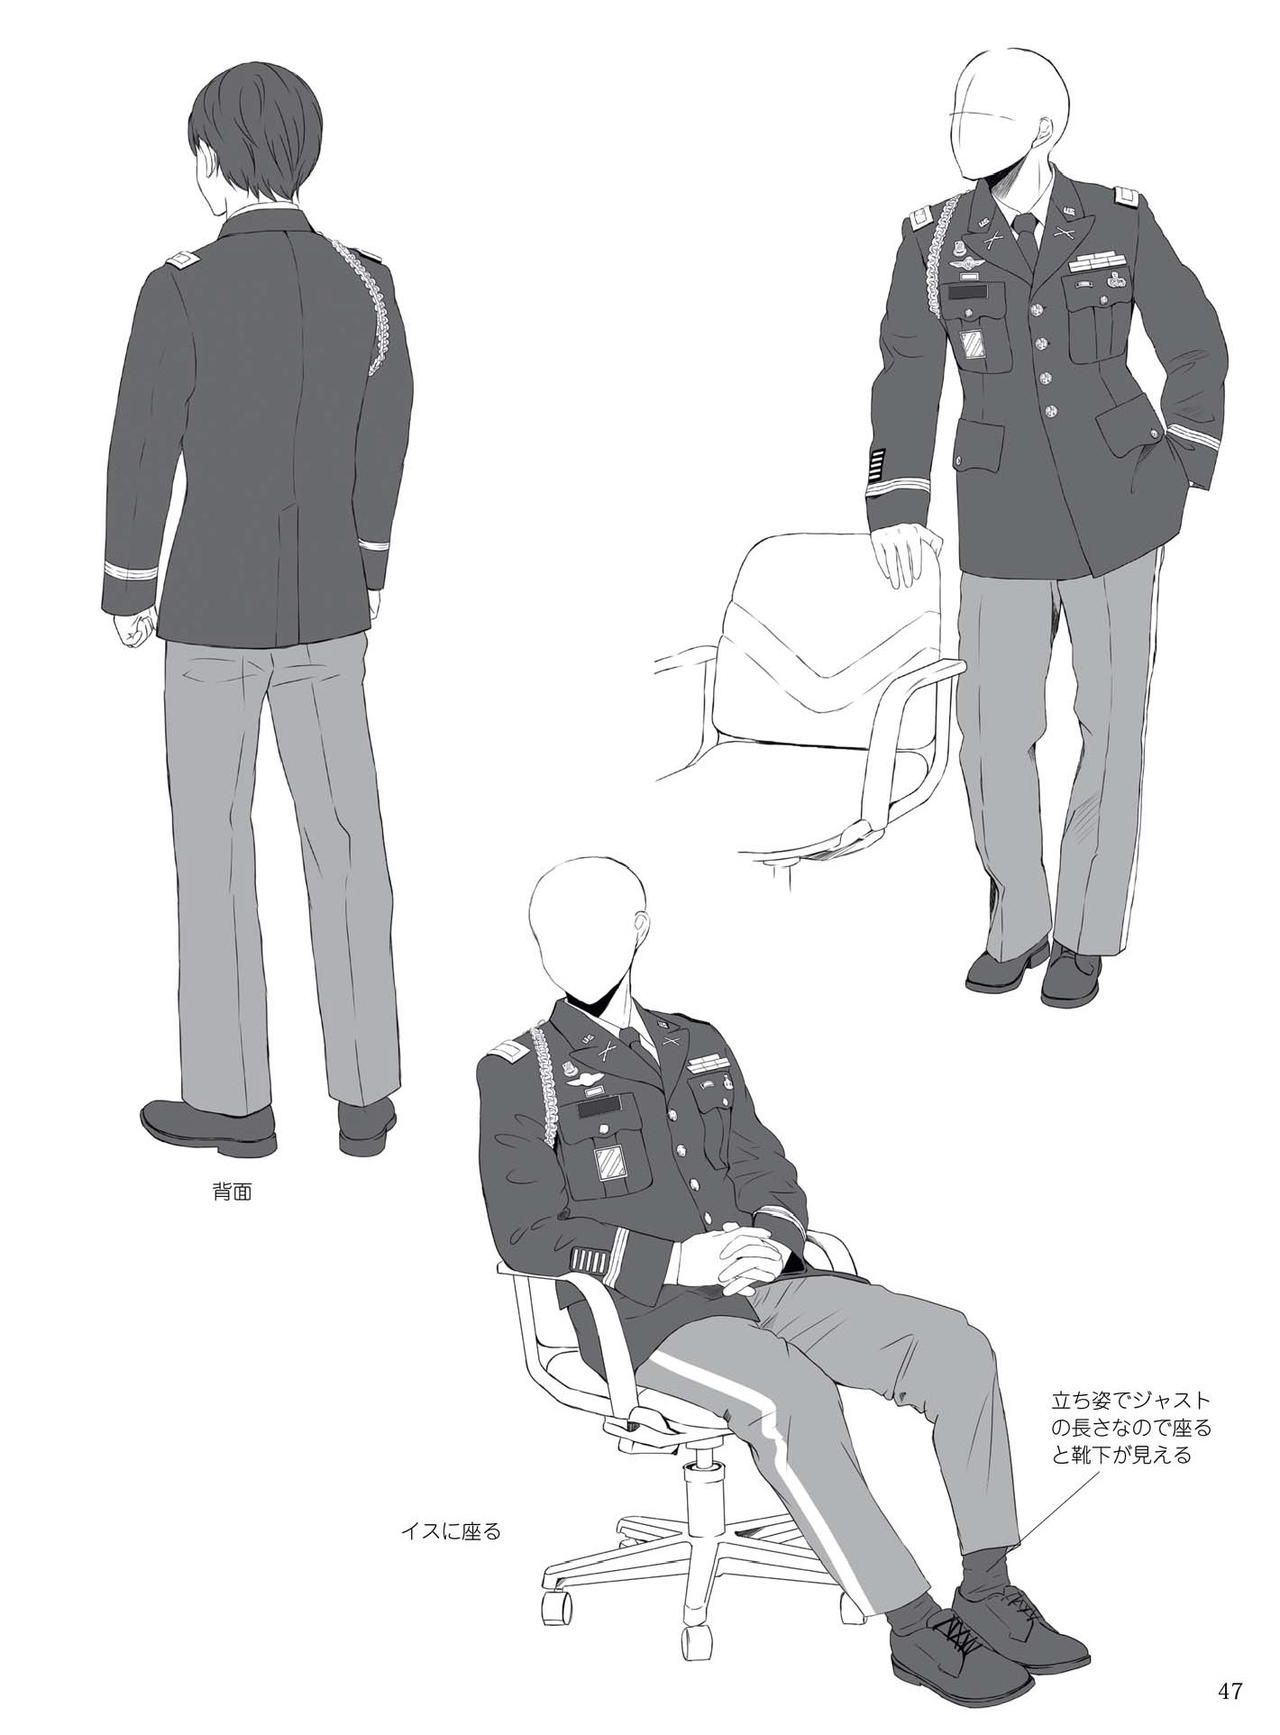 How to draw military uniforms and uniforms From Self-Defense Forces 軍服・制服の描き方 アメリカ軍・自衛隊の制服から戦闘服まで 50